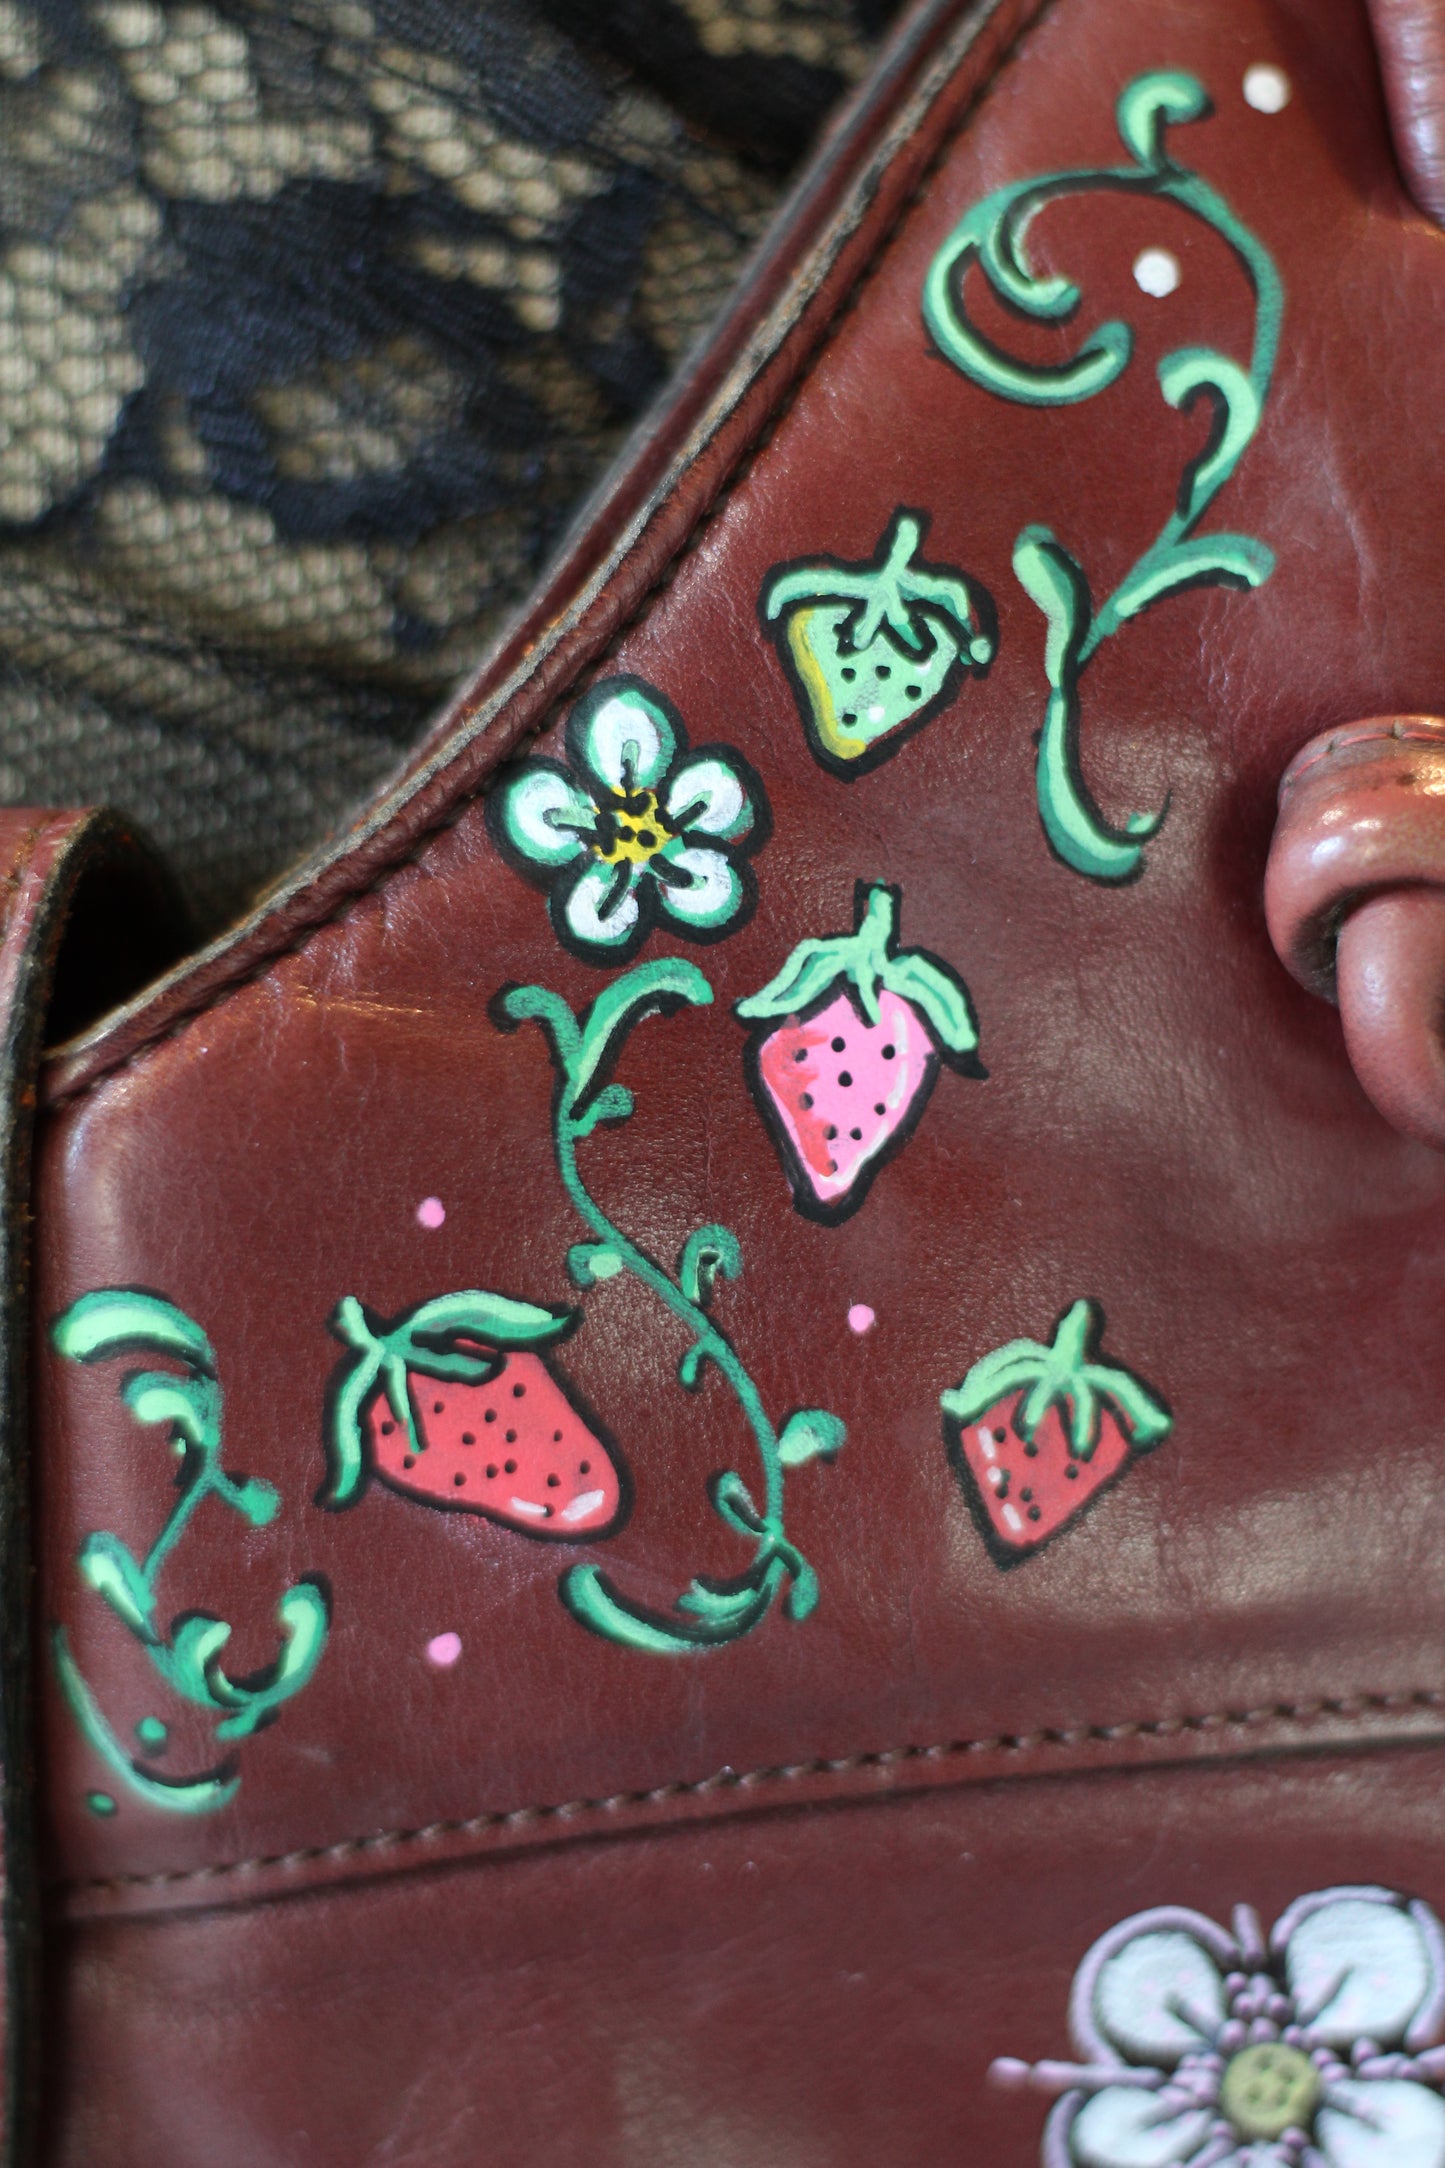 Ice Queen Alchemy - Red handbag with strawberries